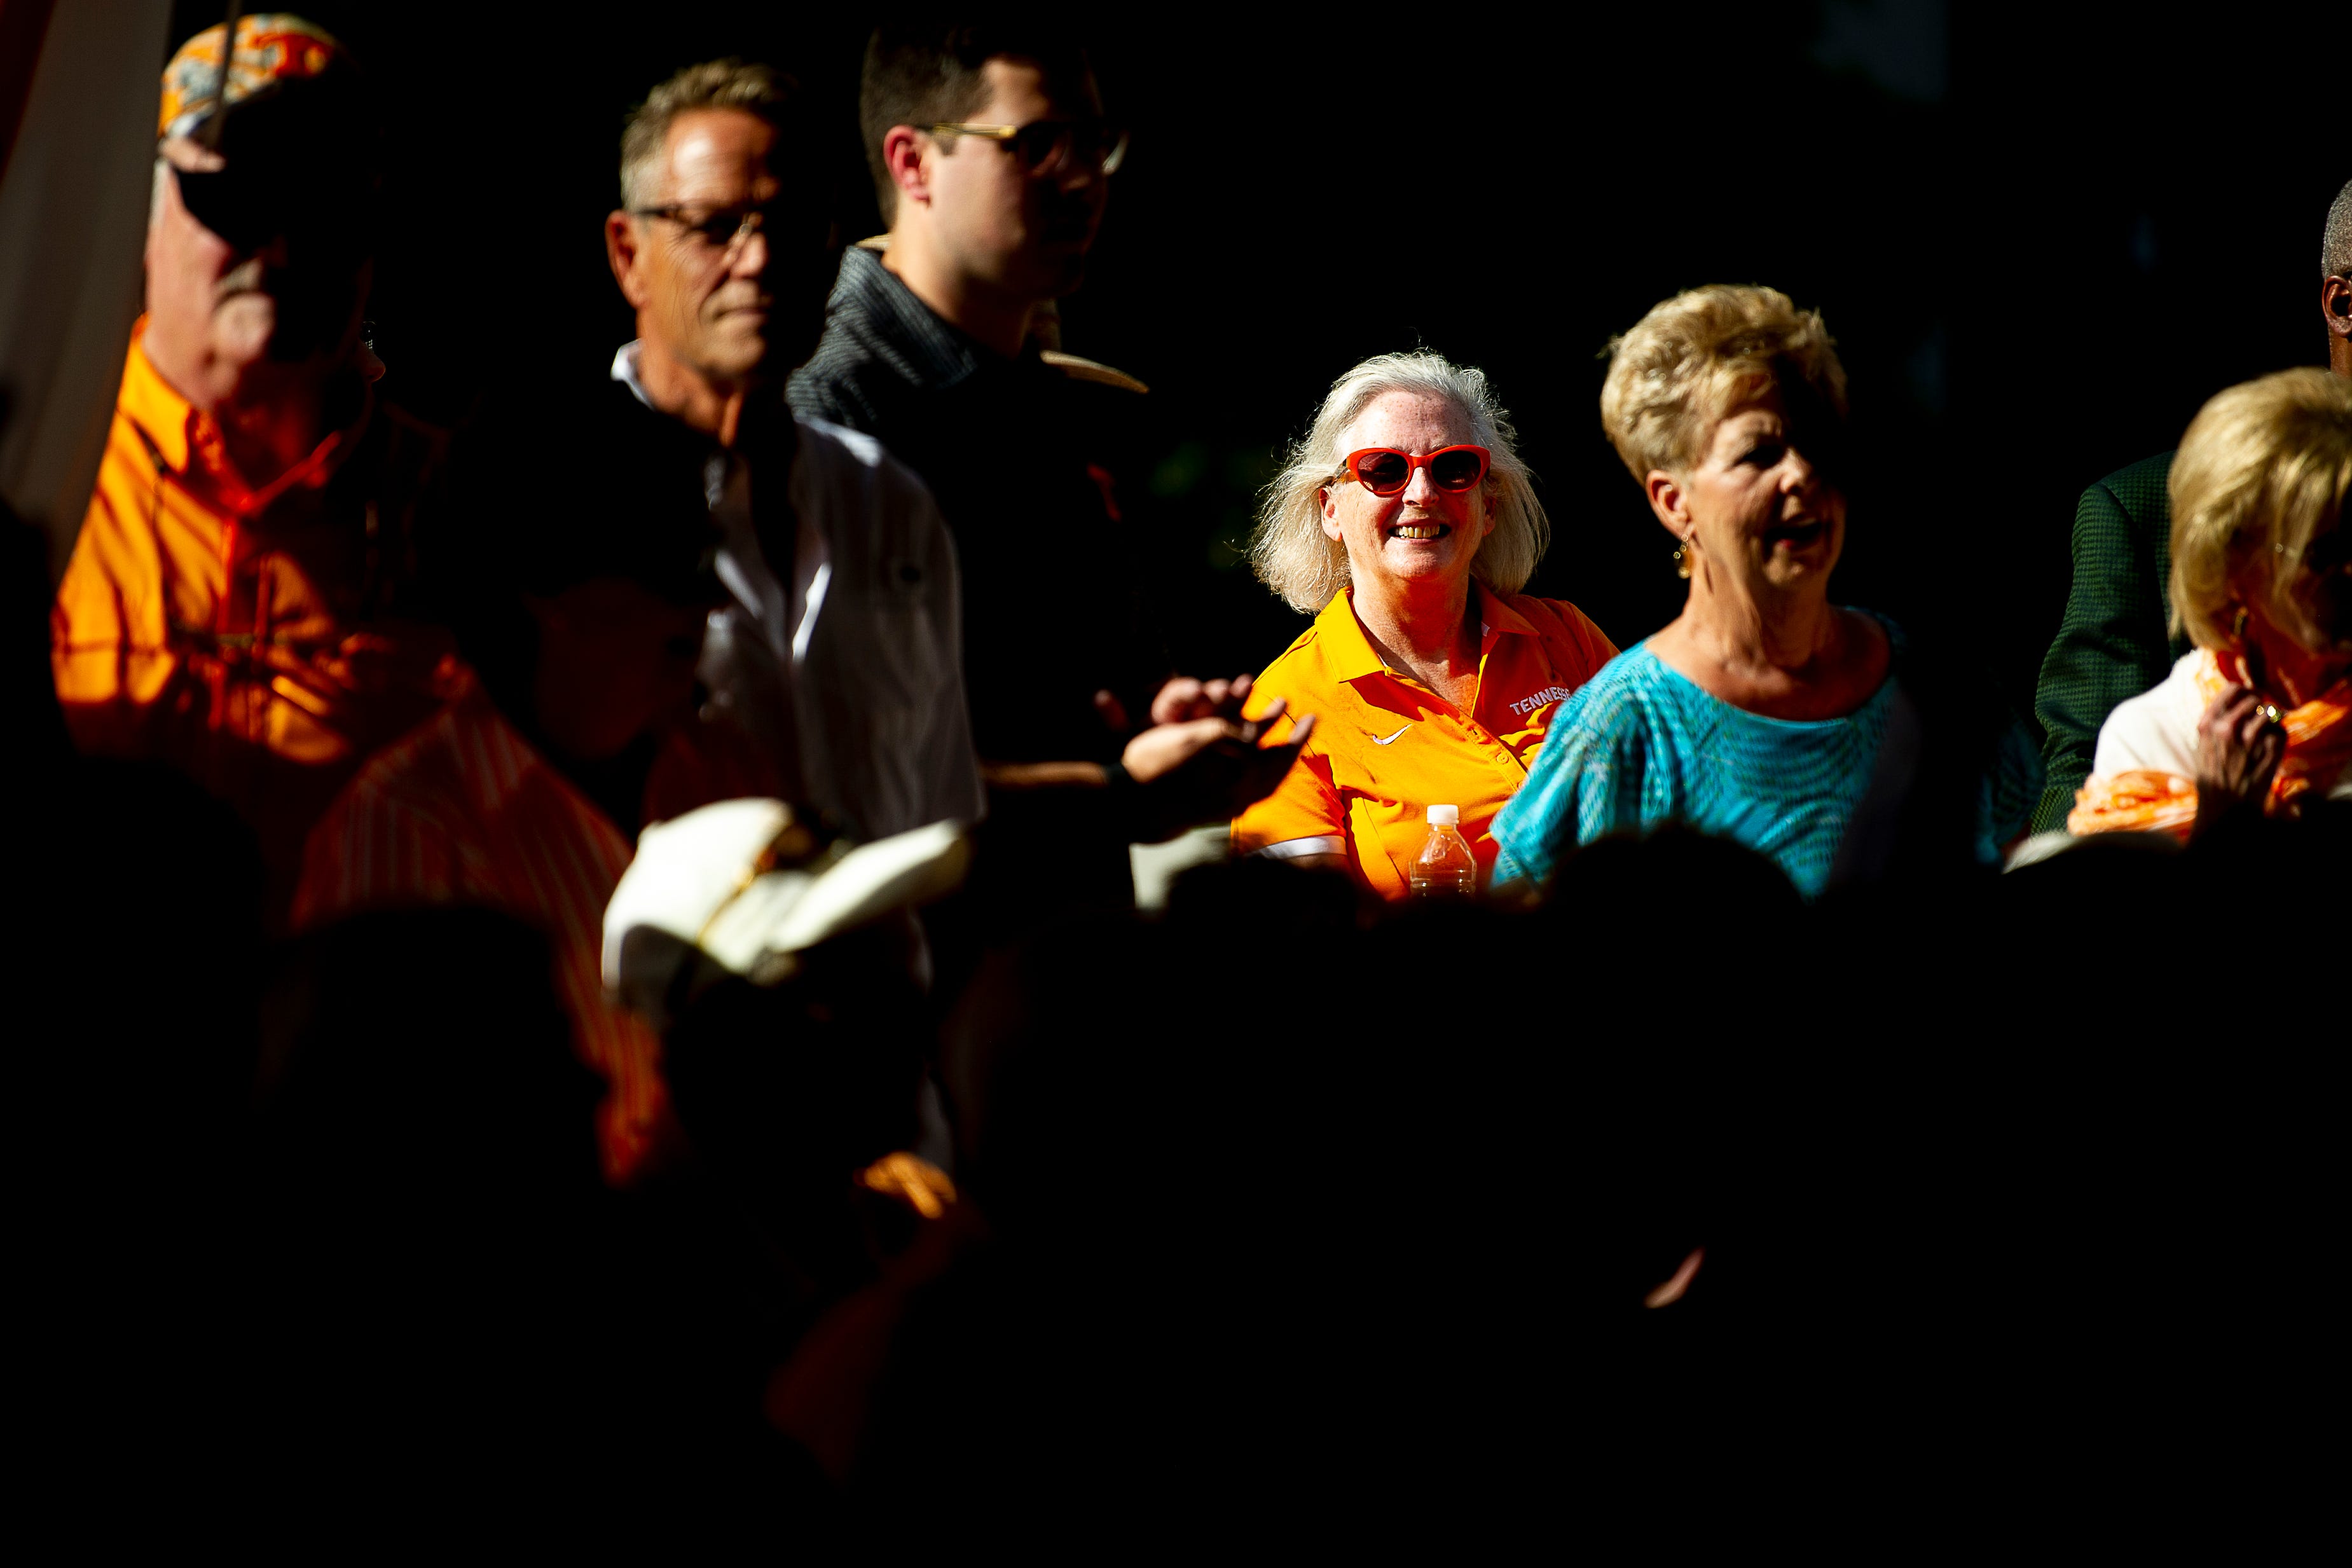 Attendees listen during a dedication ceremony of the Doug Dickey Hall of Fame Plaza at the Neyland-Thompson Sports Complex in Knoxville, Tennessee on Friday, October 4, 2019. Dickey led UT to its second SEC title in 1969 and served as the Vols' Director of Athletics from 1986 to 2003.